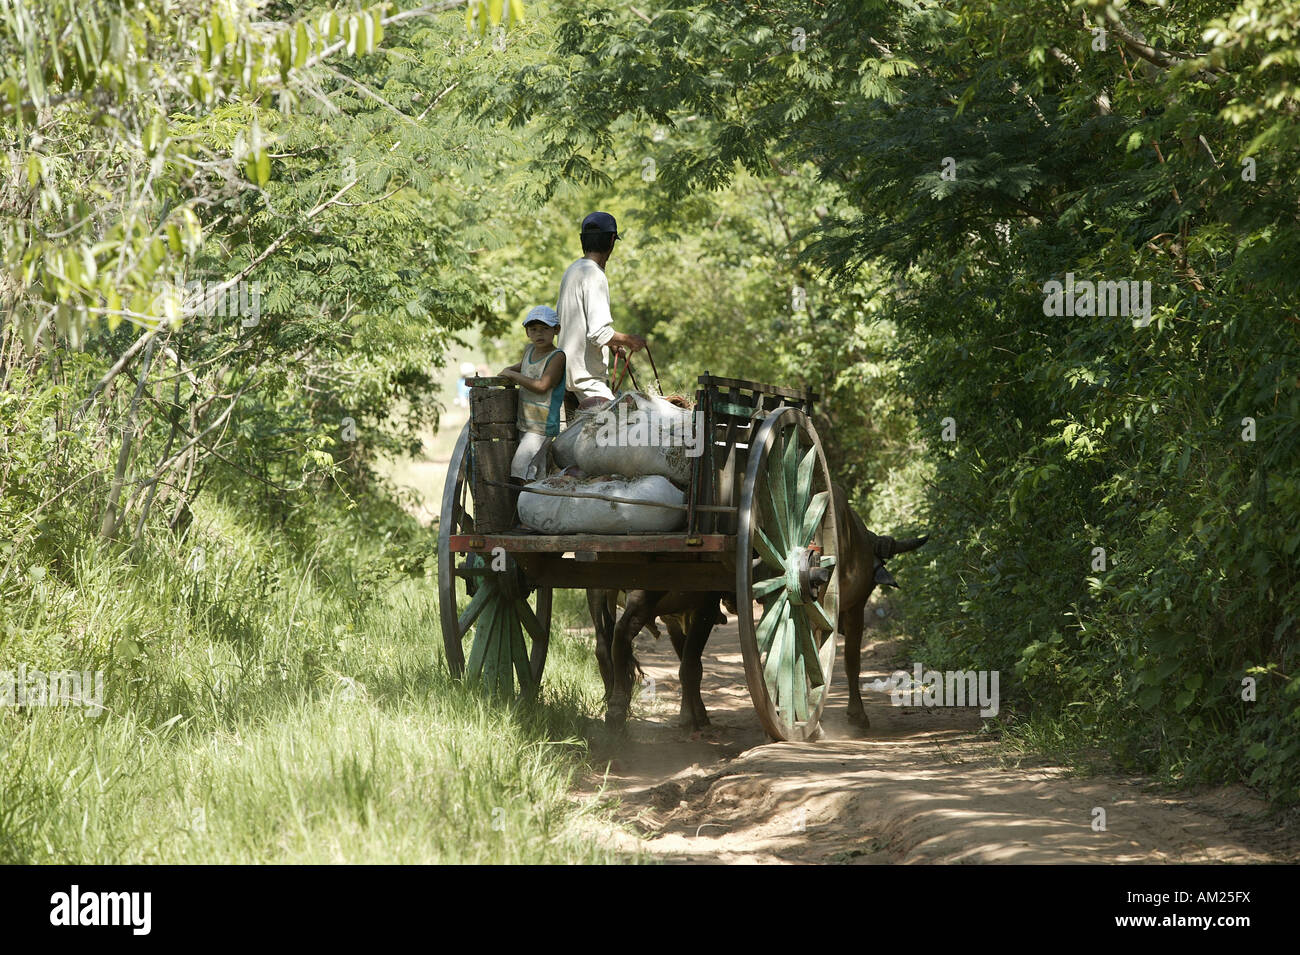 Pottery is being transported to the market by ox cart, Caacupe, Paraguay, south America Stock Photo